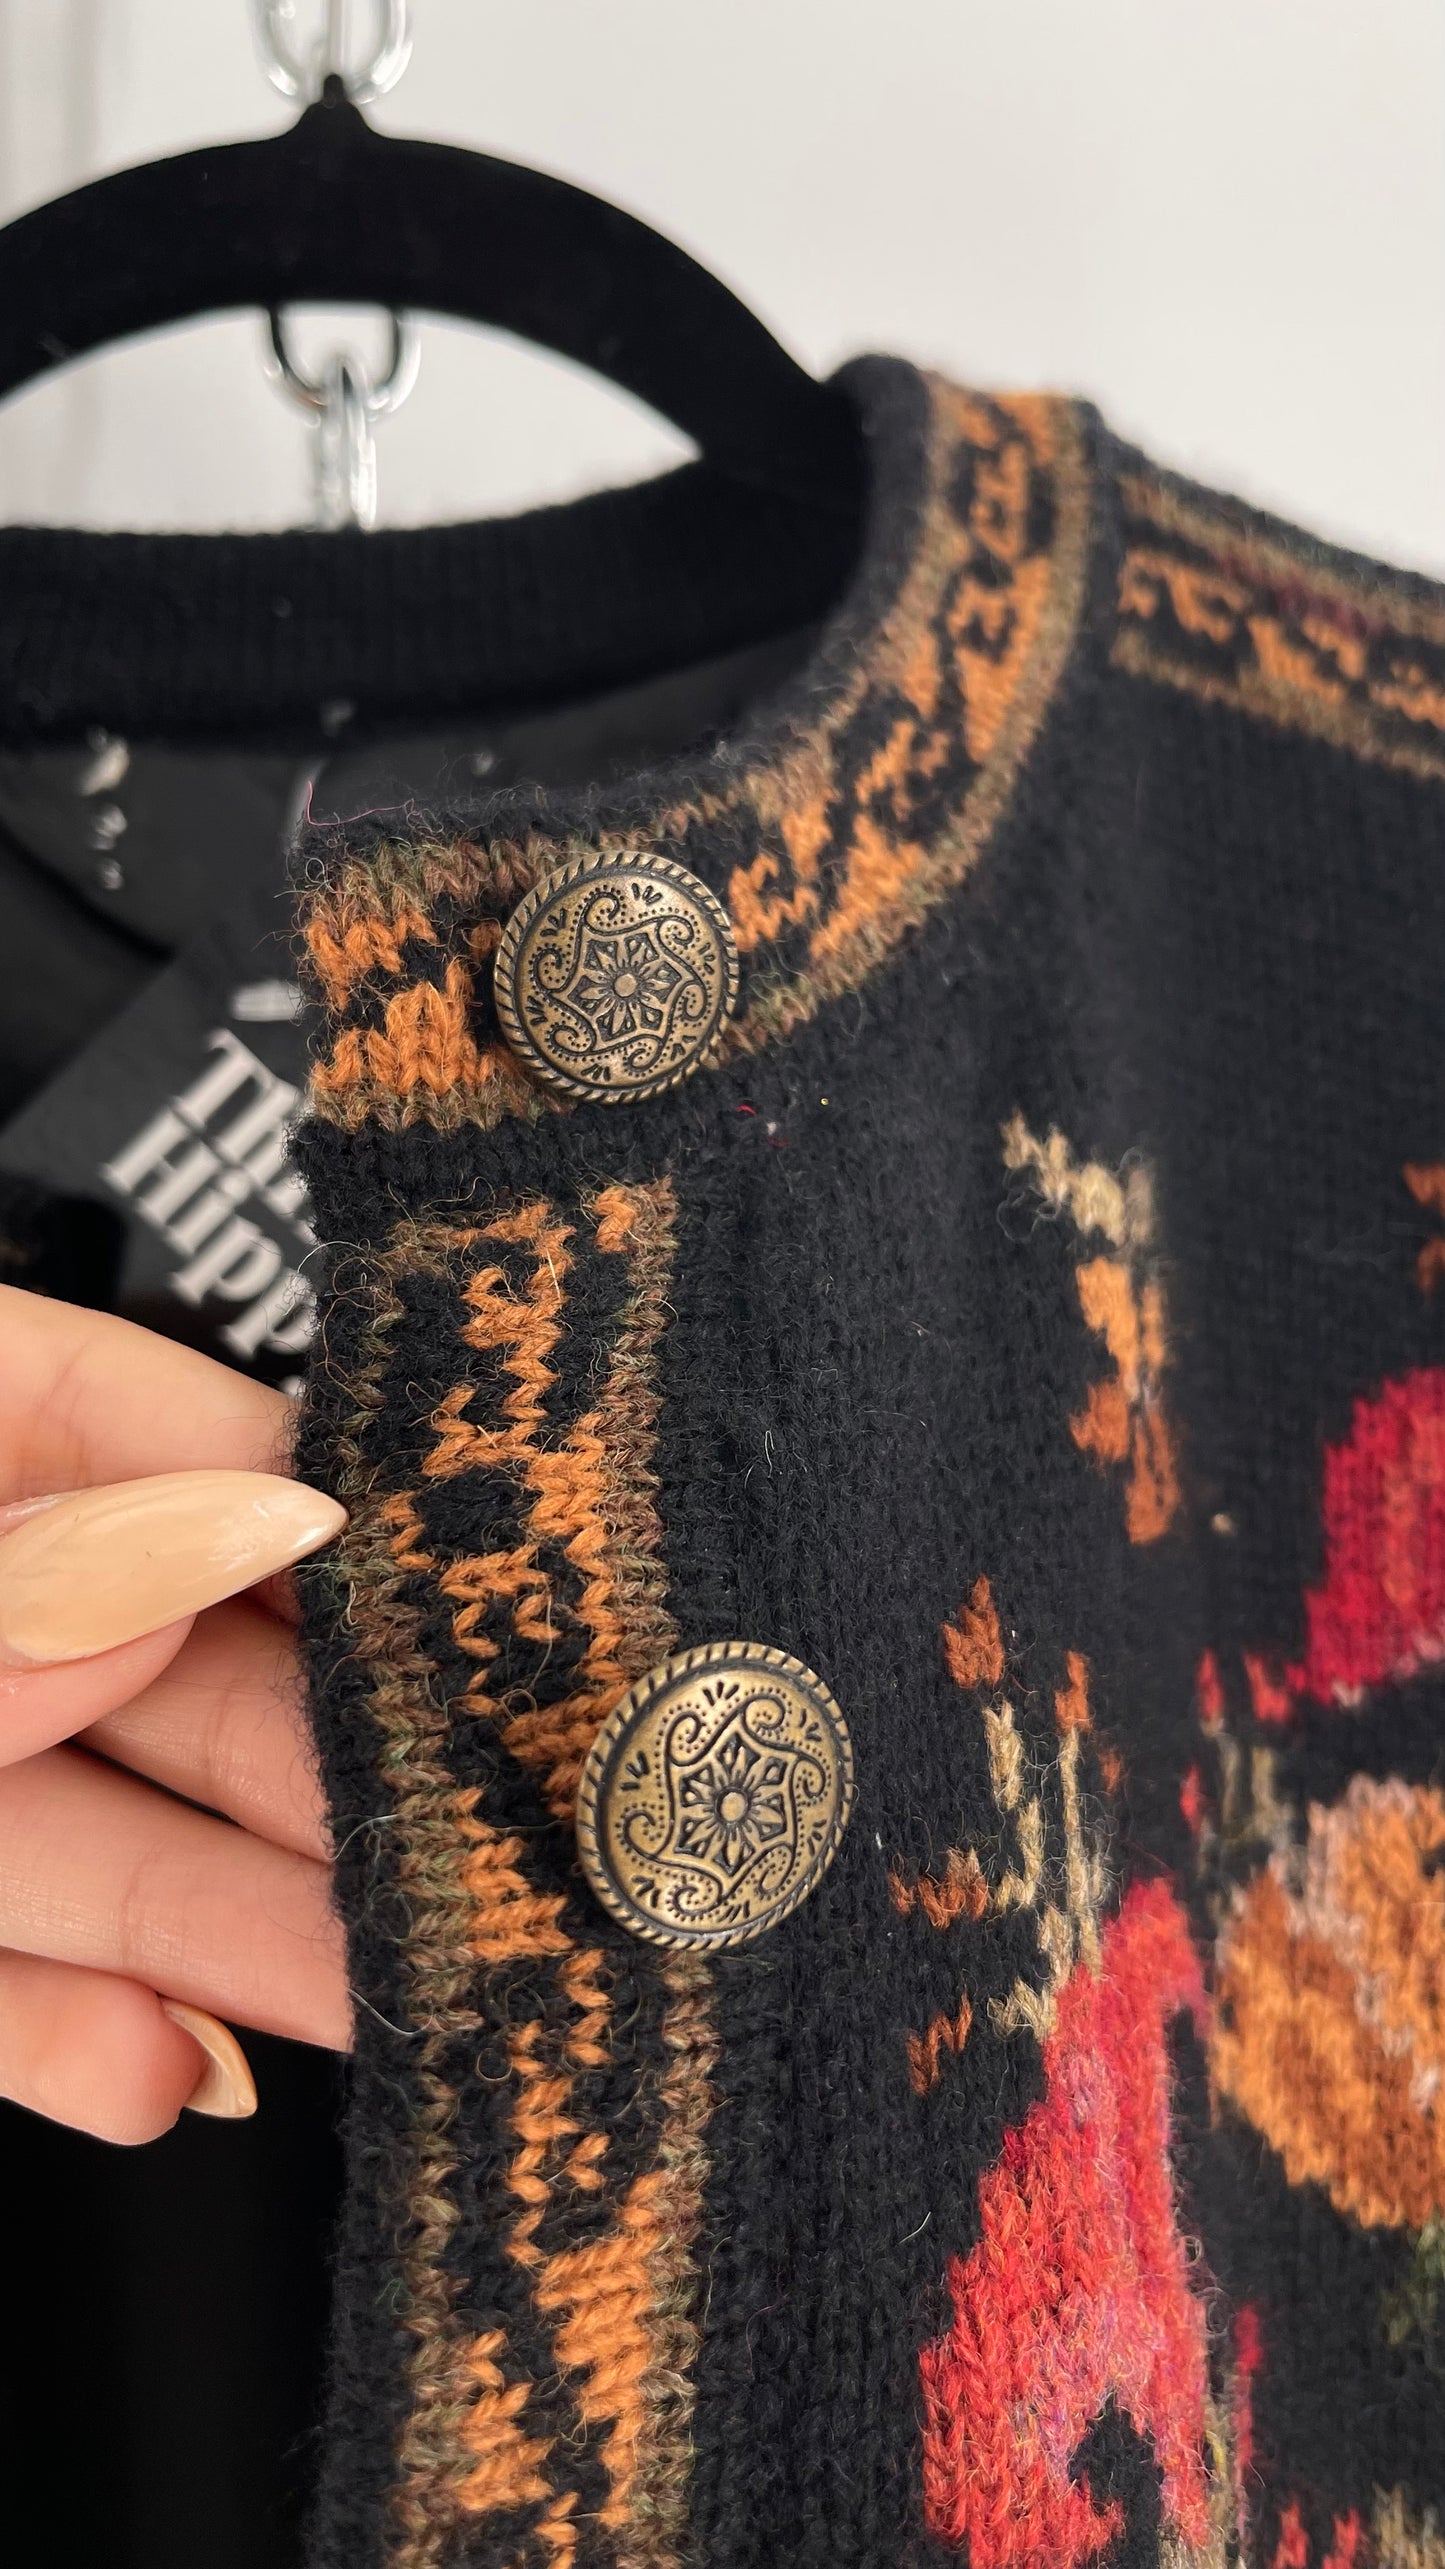 Vintage Iceland Design Wool Jacket with Brass Embossed Buttons and Folk Floral Patterning(C)(Medium)